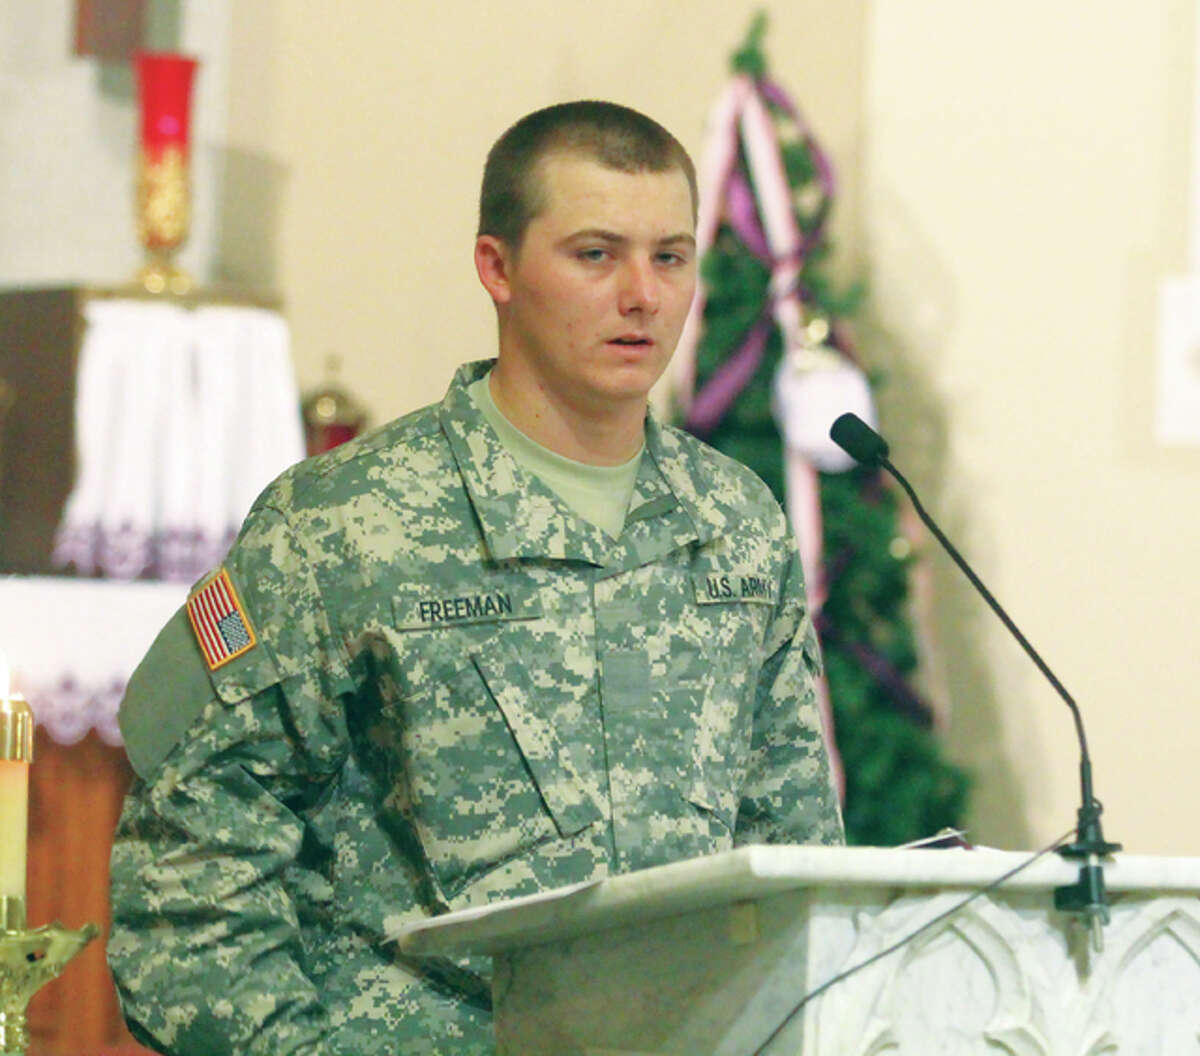 Pvt. Thomas Freeman, who is undergoing basic training at Fort Jackson, South Carolina, speaks briefly during a Mass honoring those serving in the military. The service is held monthly at SS Peter and Paul Church.